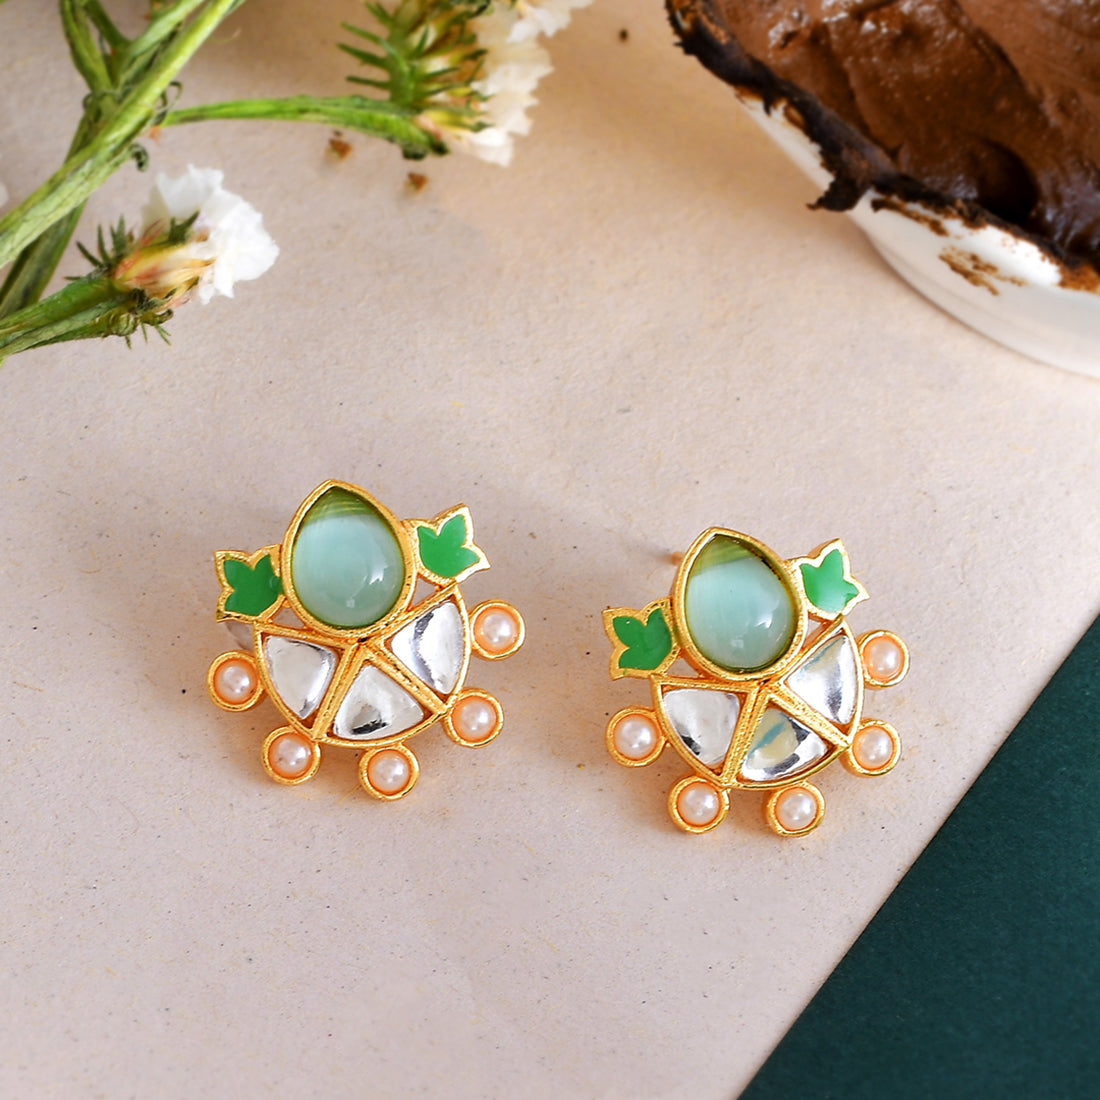 Women's Forever More Enamelled Green Stone And Pearls Earrings - Voylla